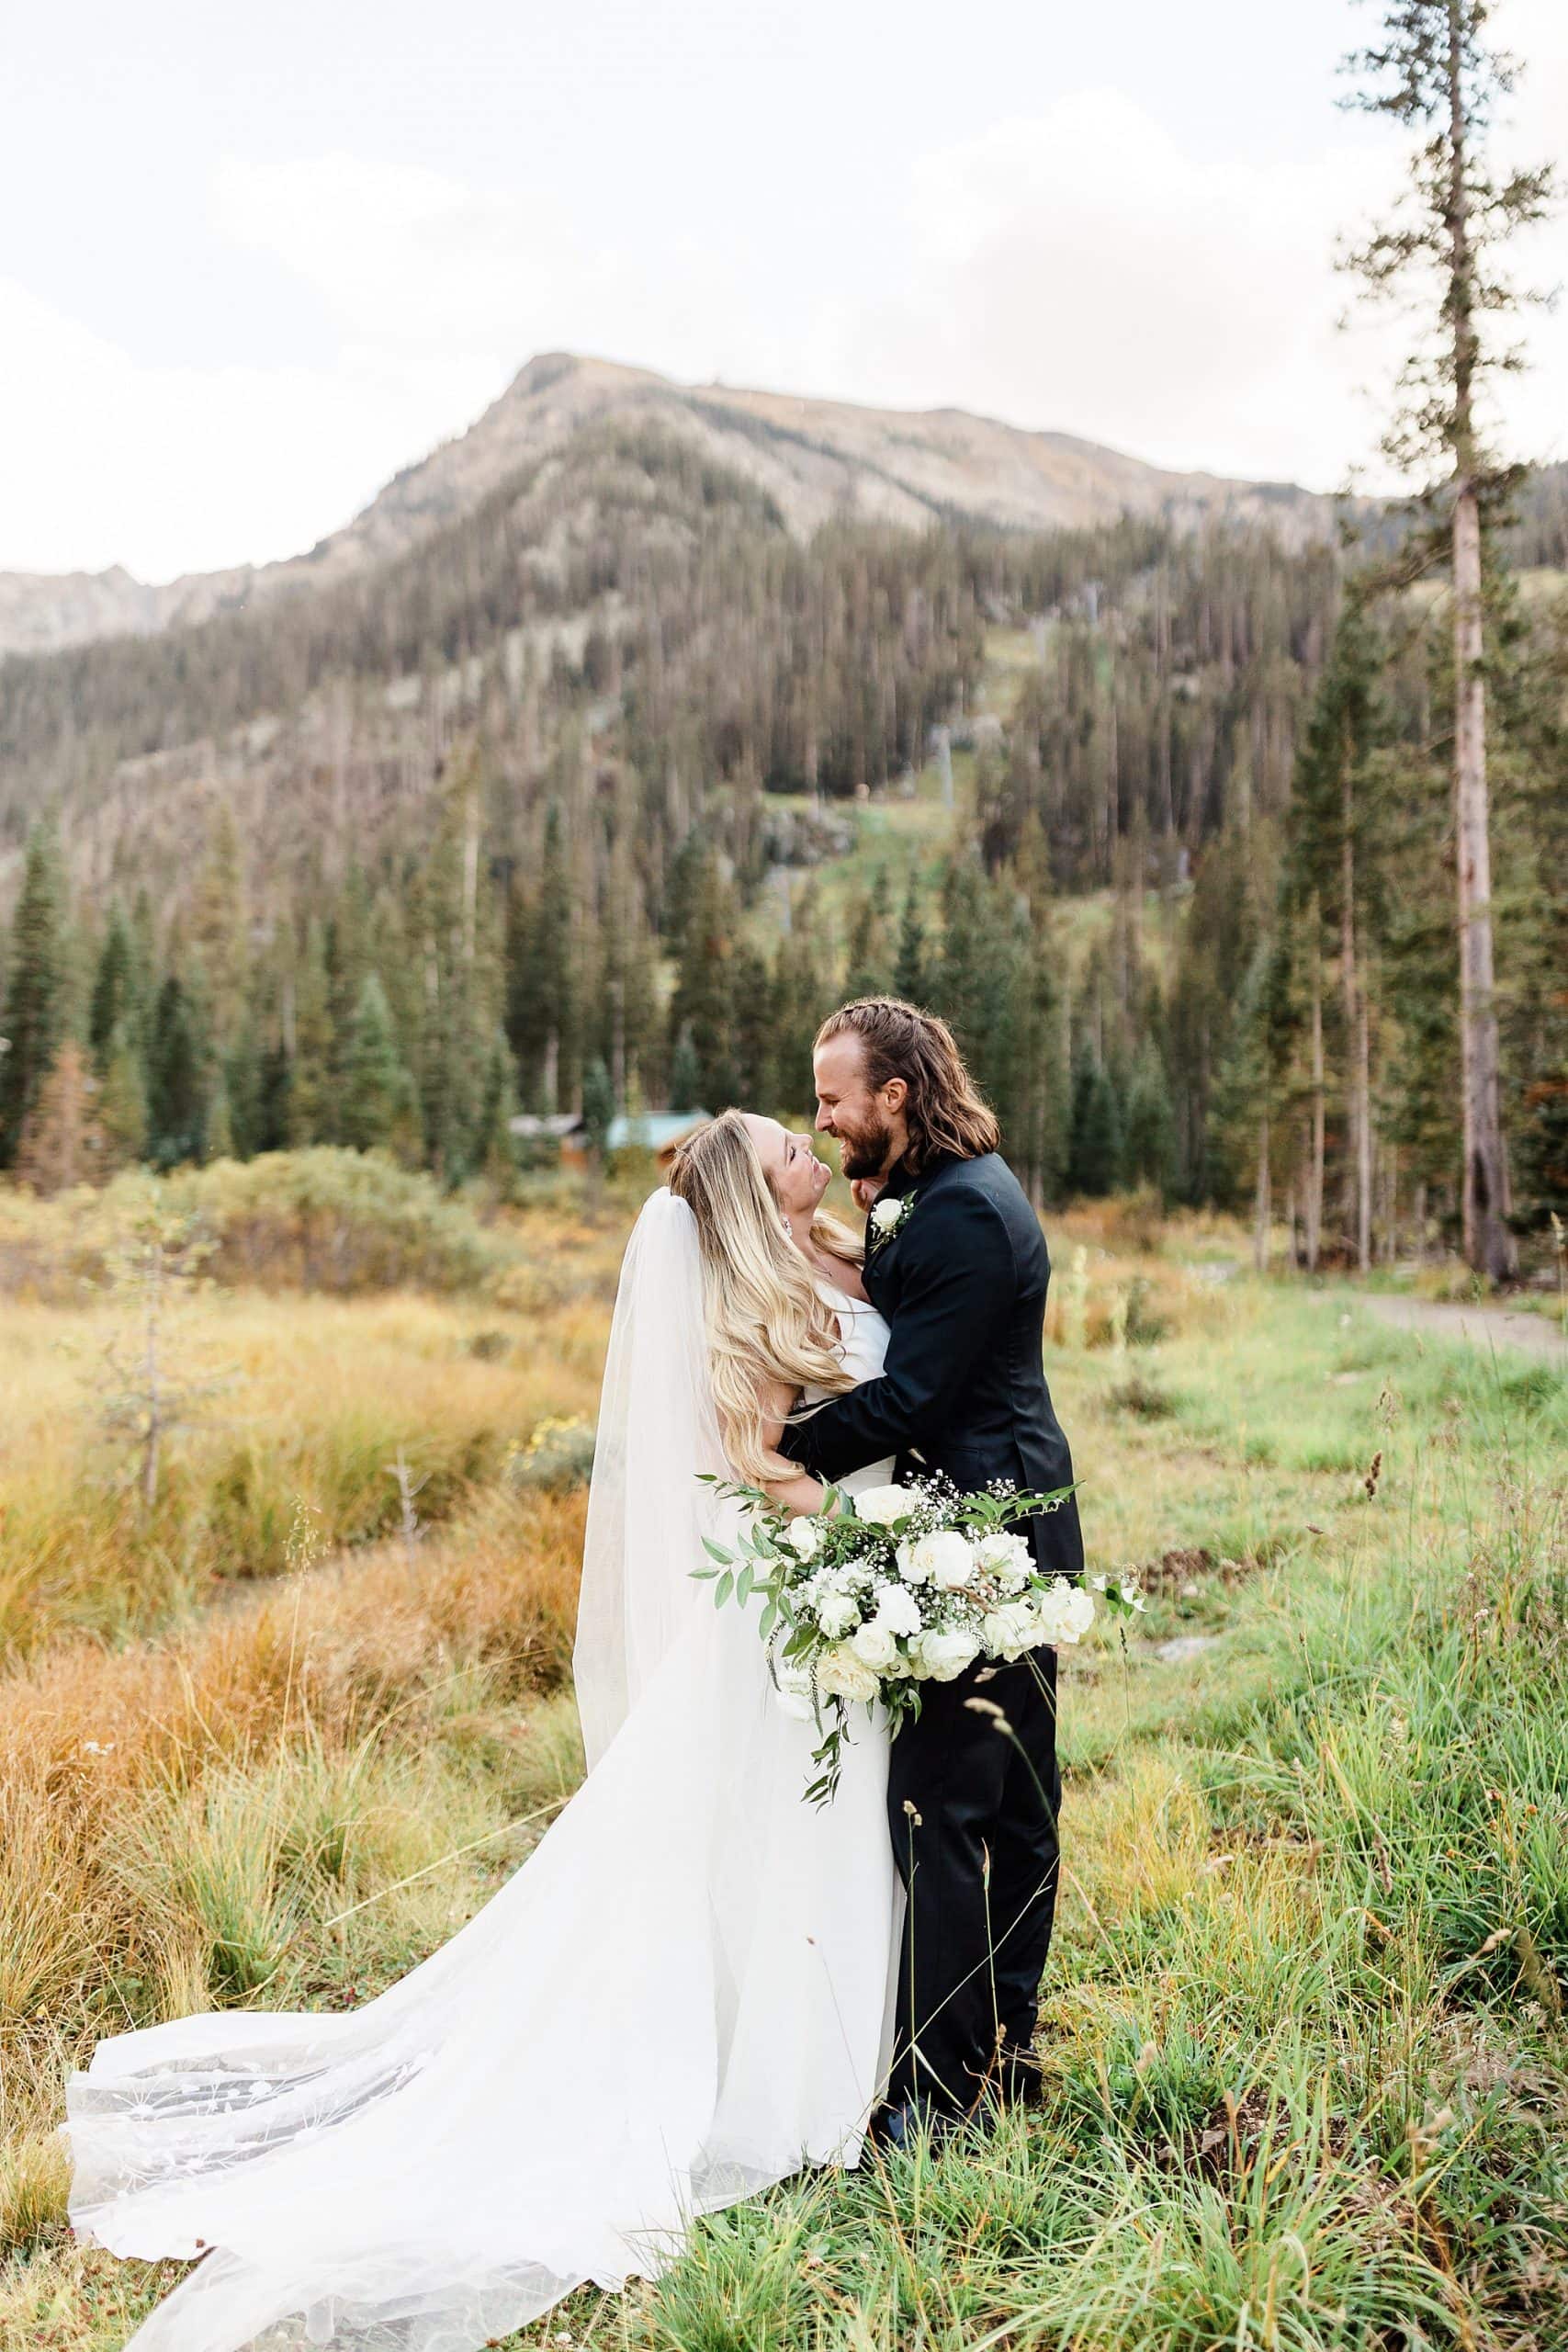 Newlyweds share a laugh after their Summer elopement in Taos Ski Valley.